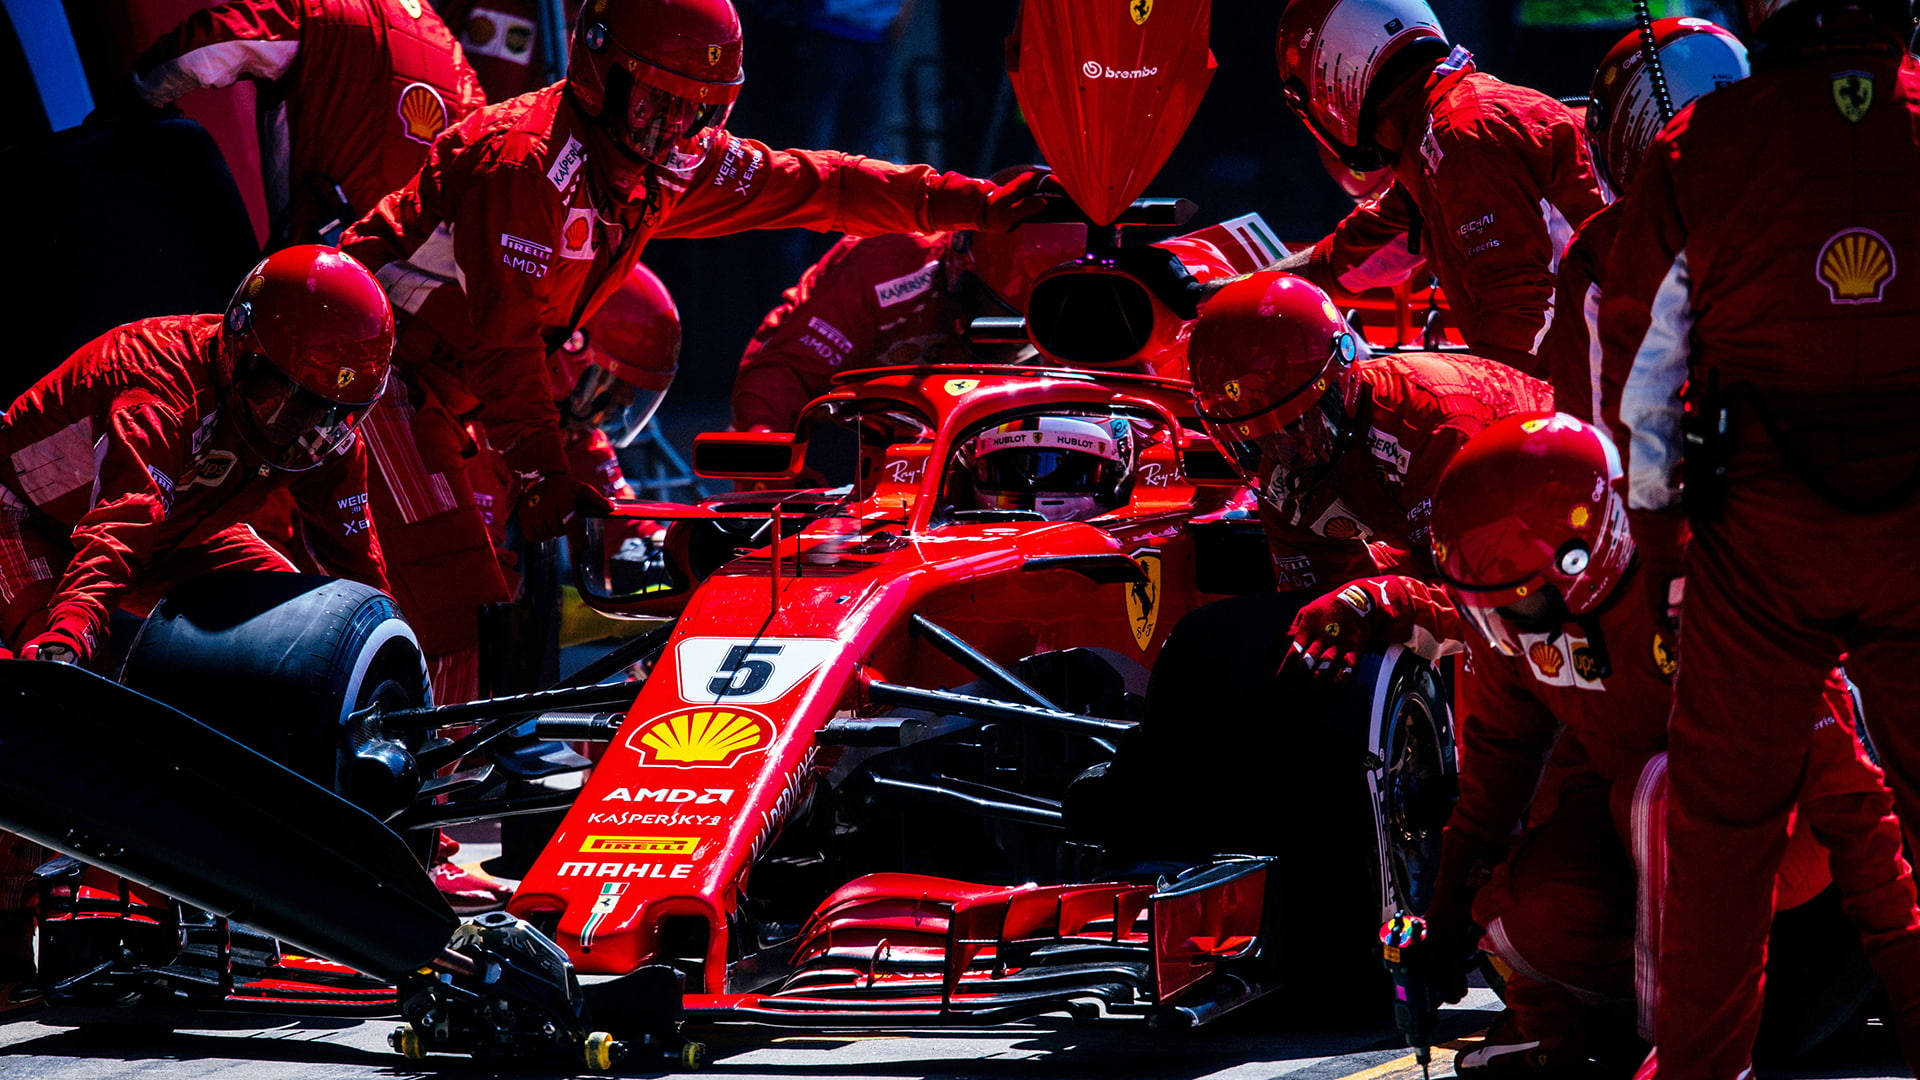 Ferrari F1 Sf15-t At Pit Stop Background